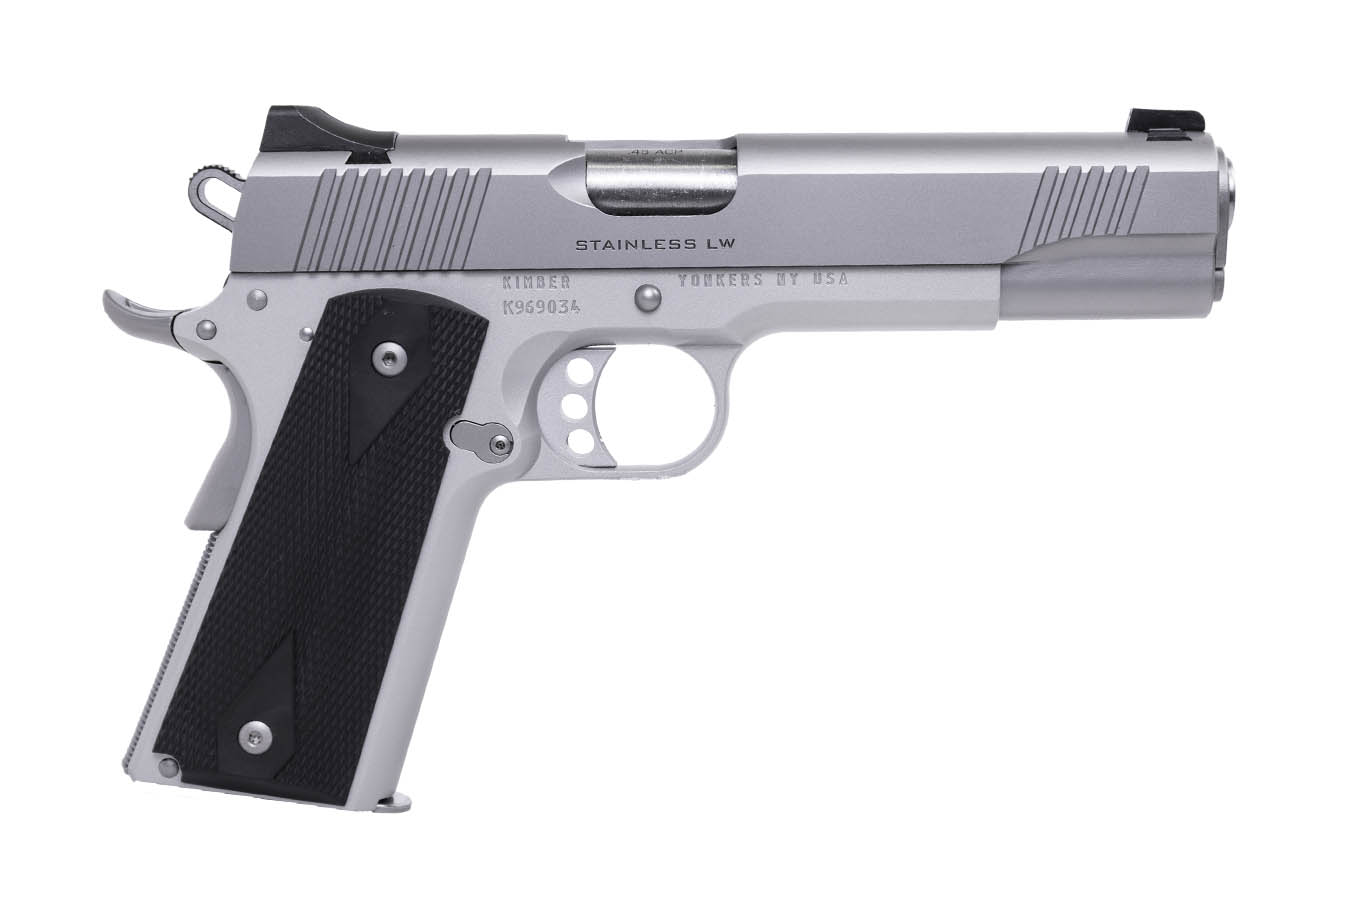 No. 4 Best Selling: KIMBER STAINLESS LW 45ACP 1911 SPECIAL EDITION CLUB BUNDLE